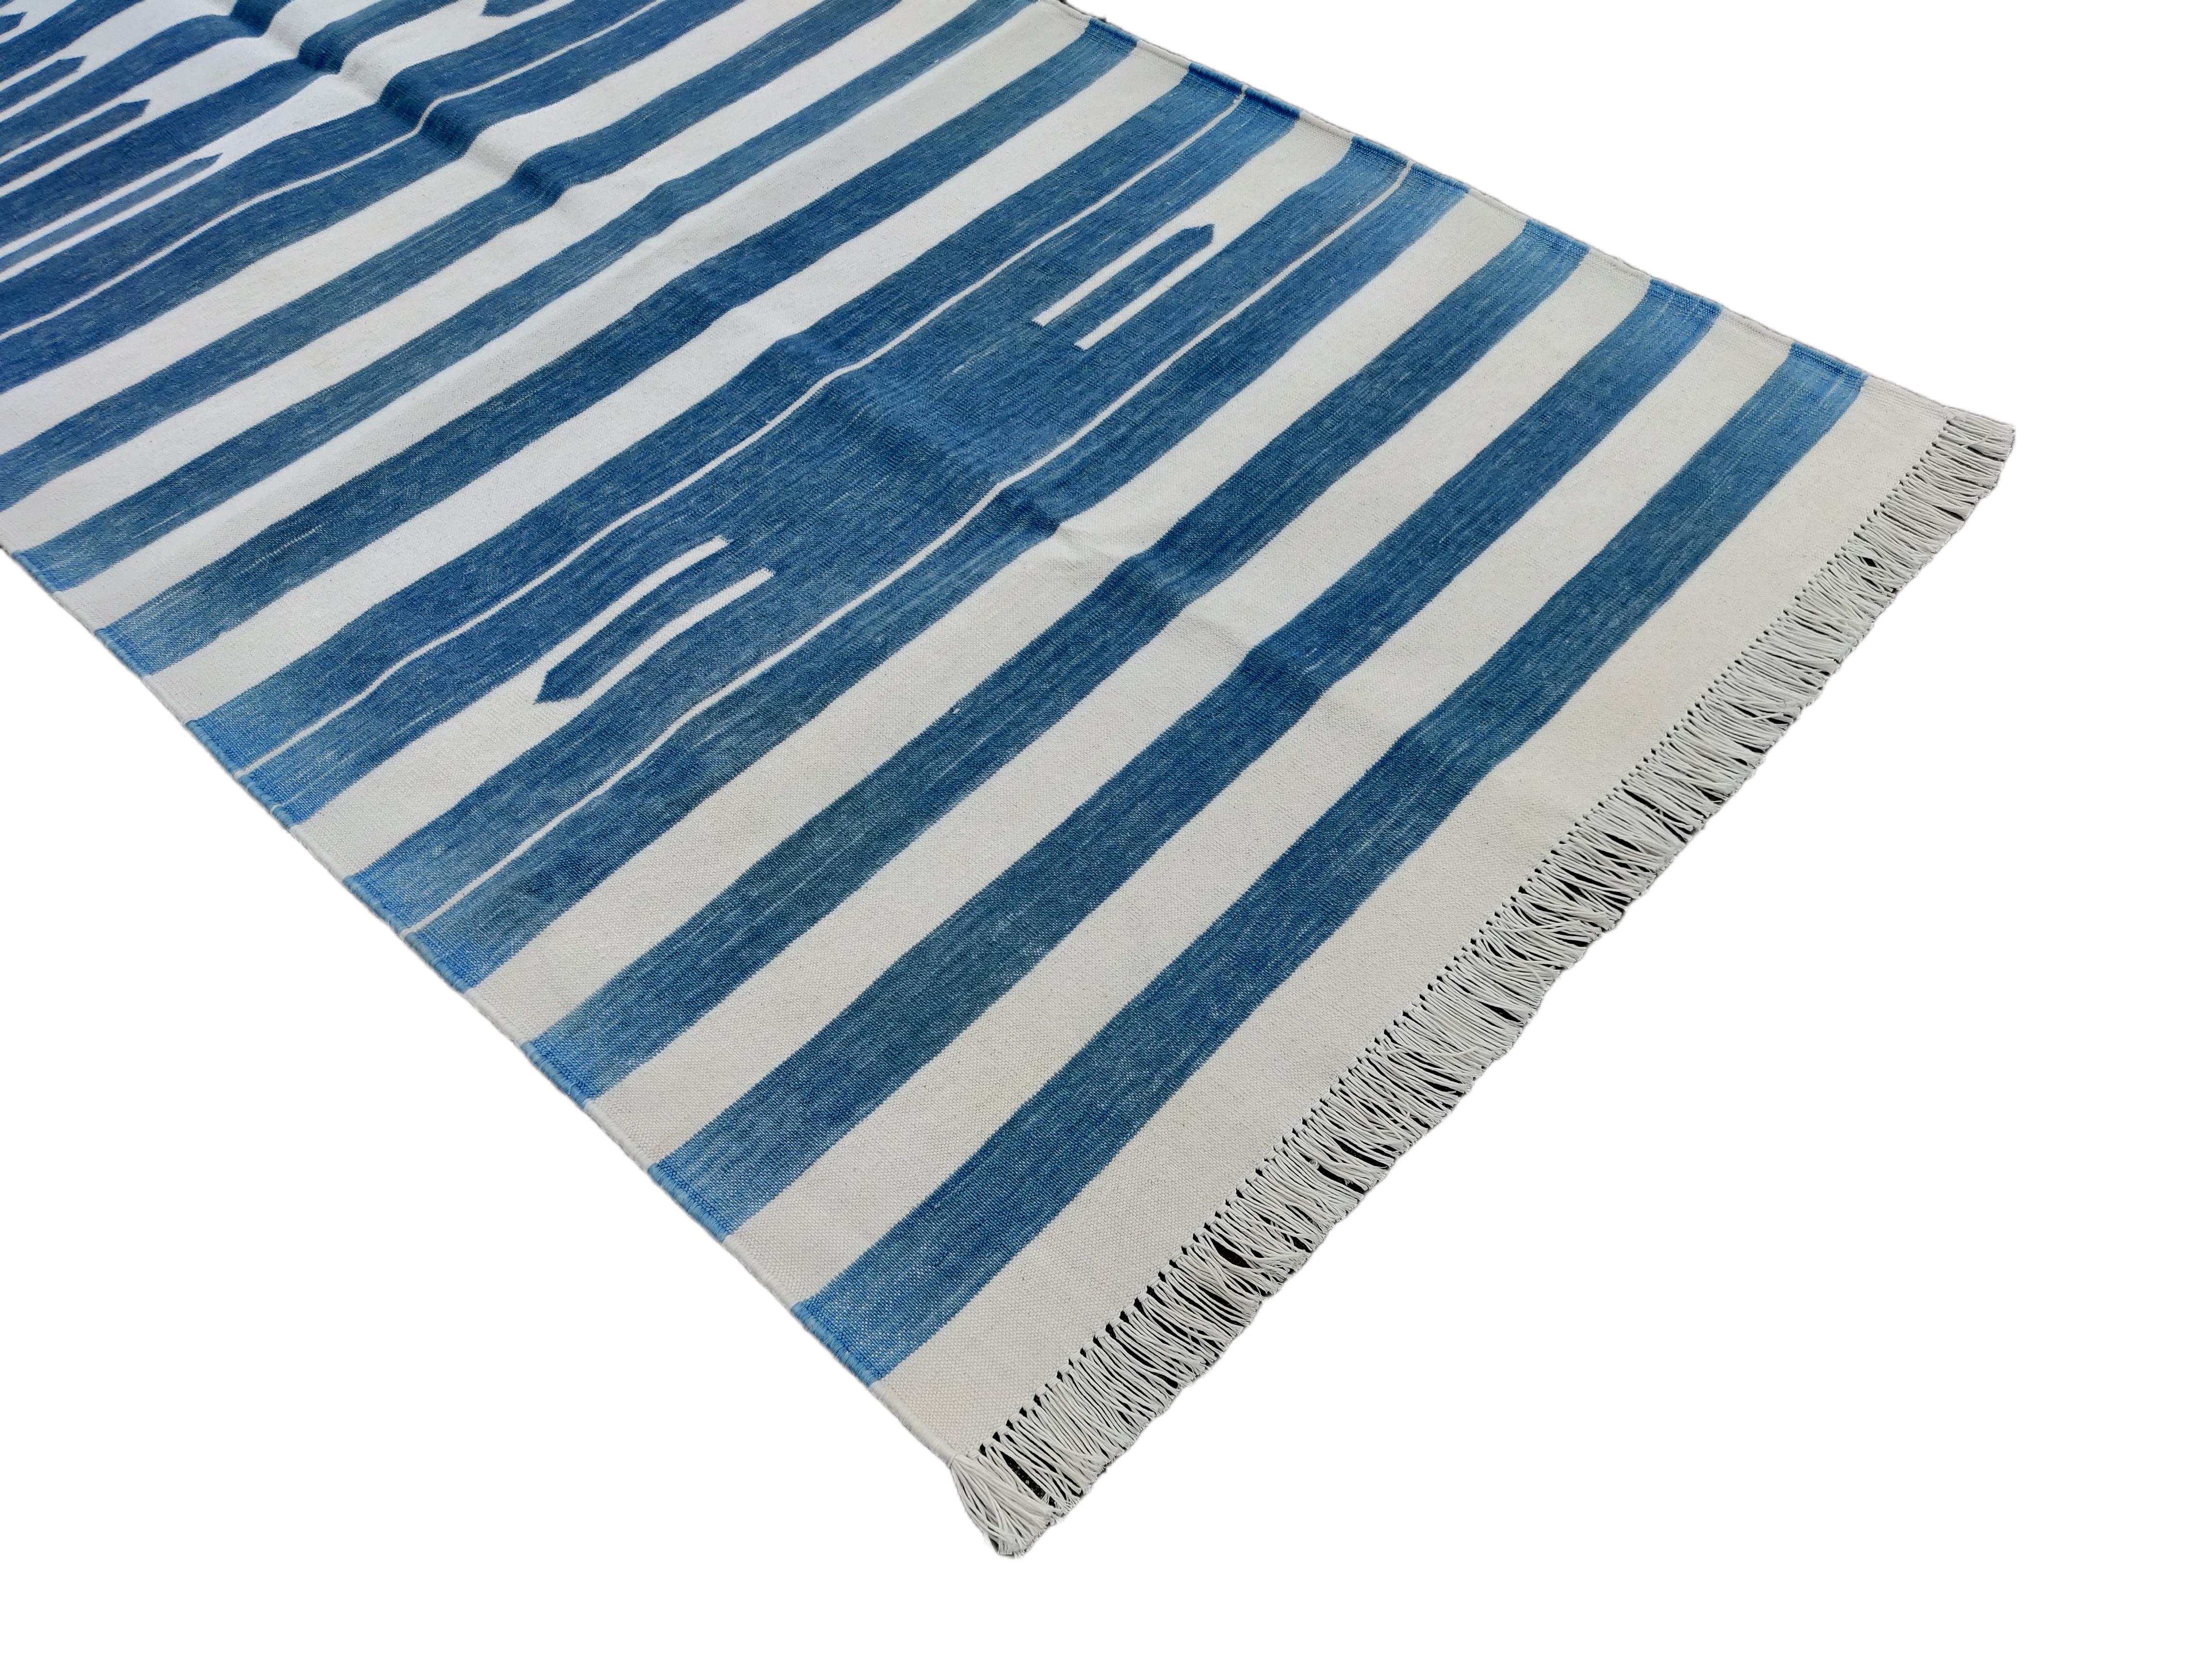 Handmade Cotton Area Flat Weave Runner, 3x12 Blue And White Striped Dhurrie Rug In New Condition For Sale In Jaipur, IN